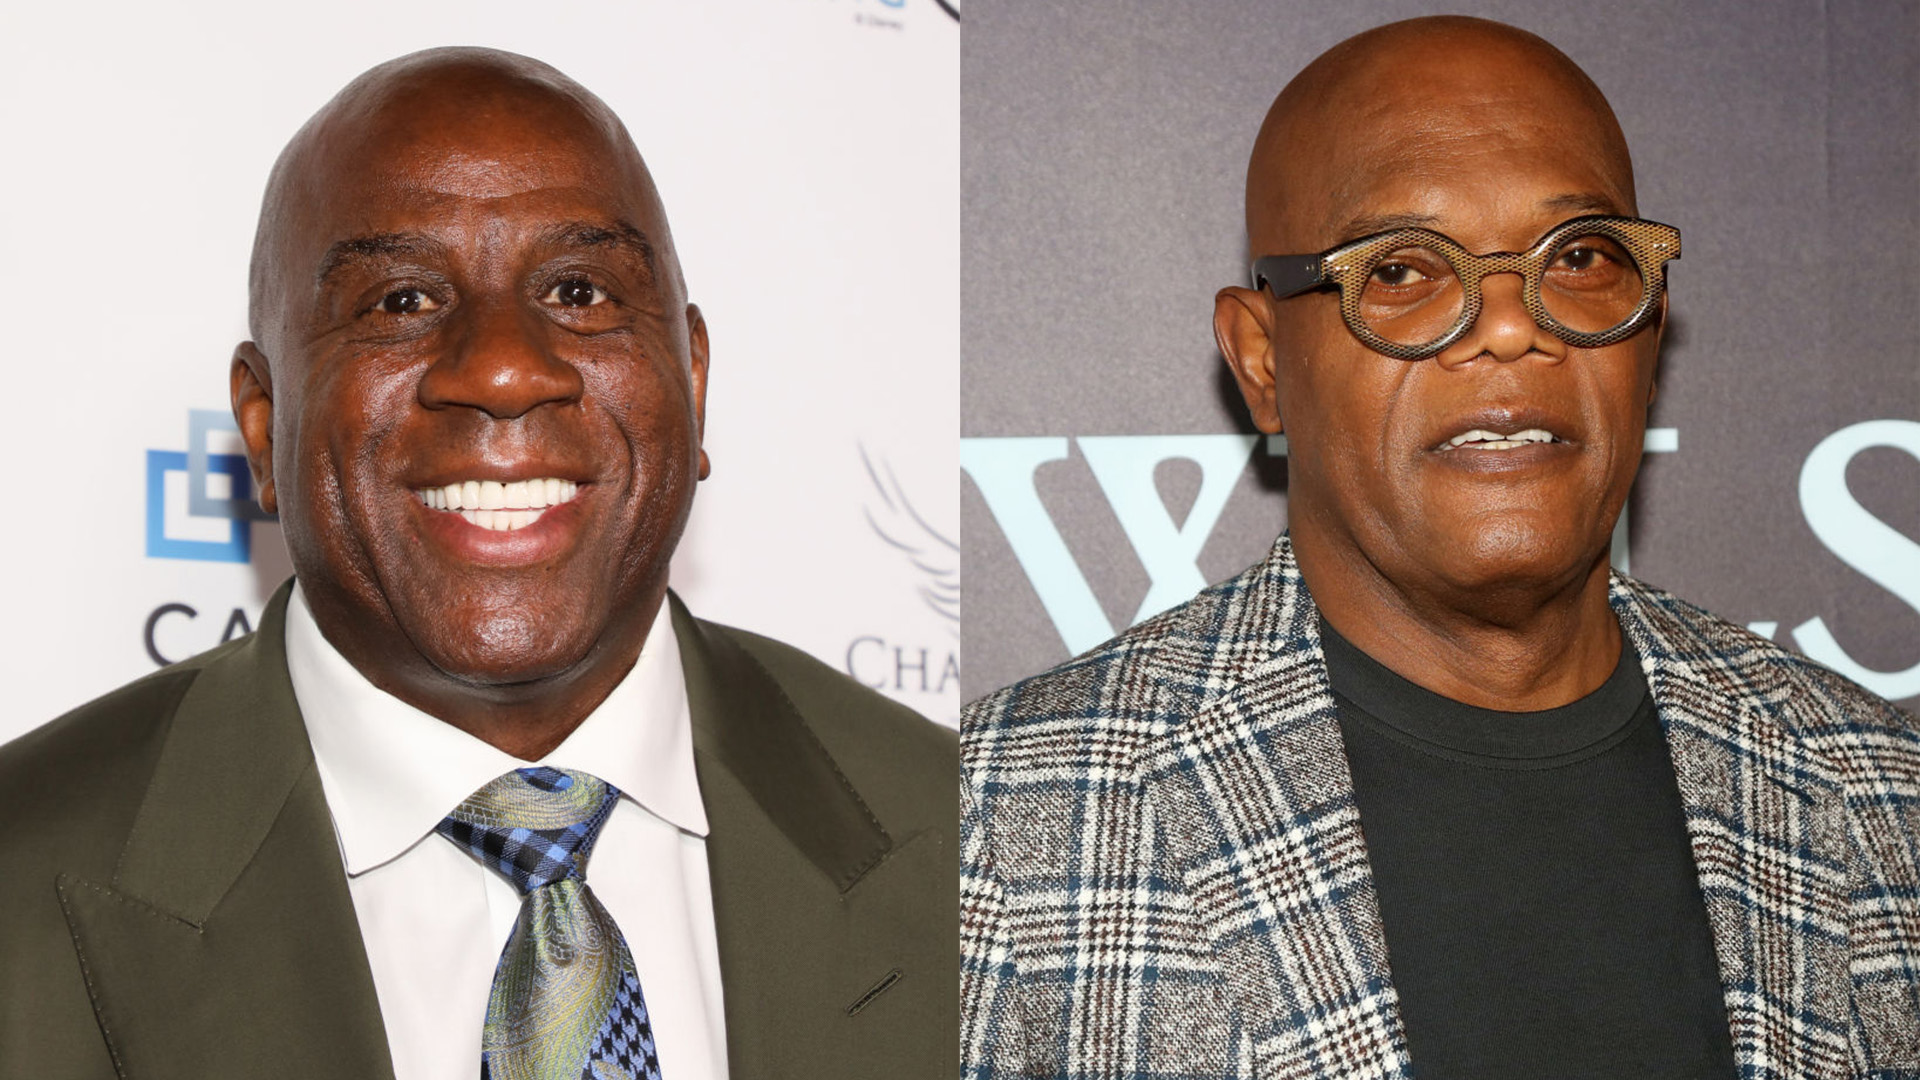 Magic Johnson, Samuel L. Jackson, And More Invest In $750K Pre-Seed Round For Women-Led Entertainment Startup